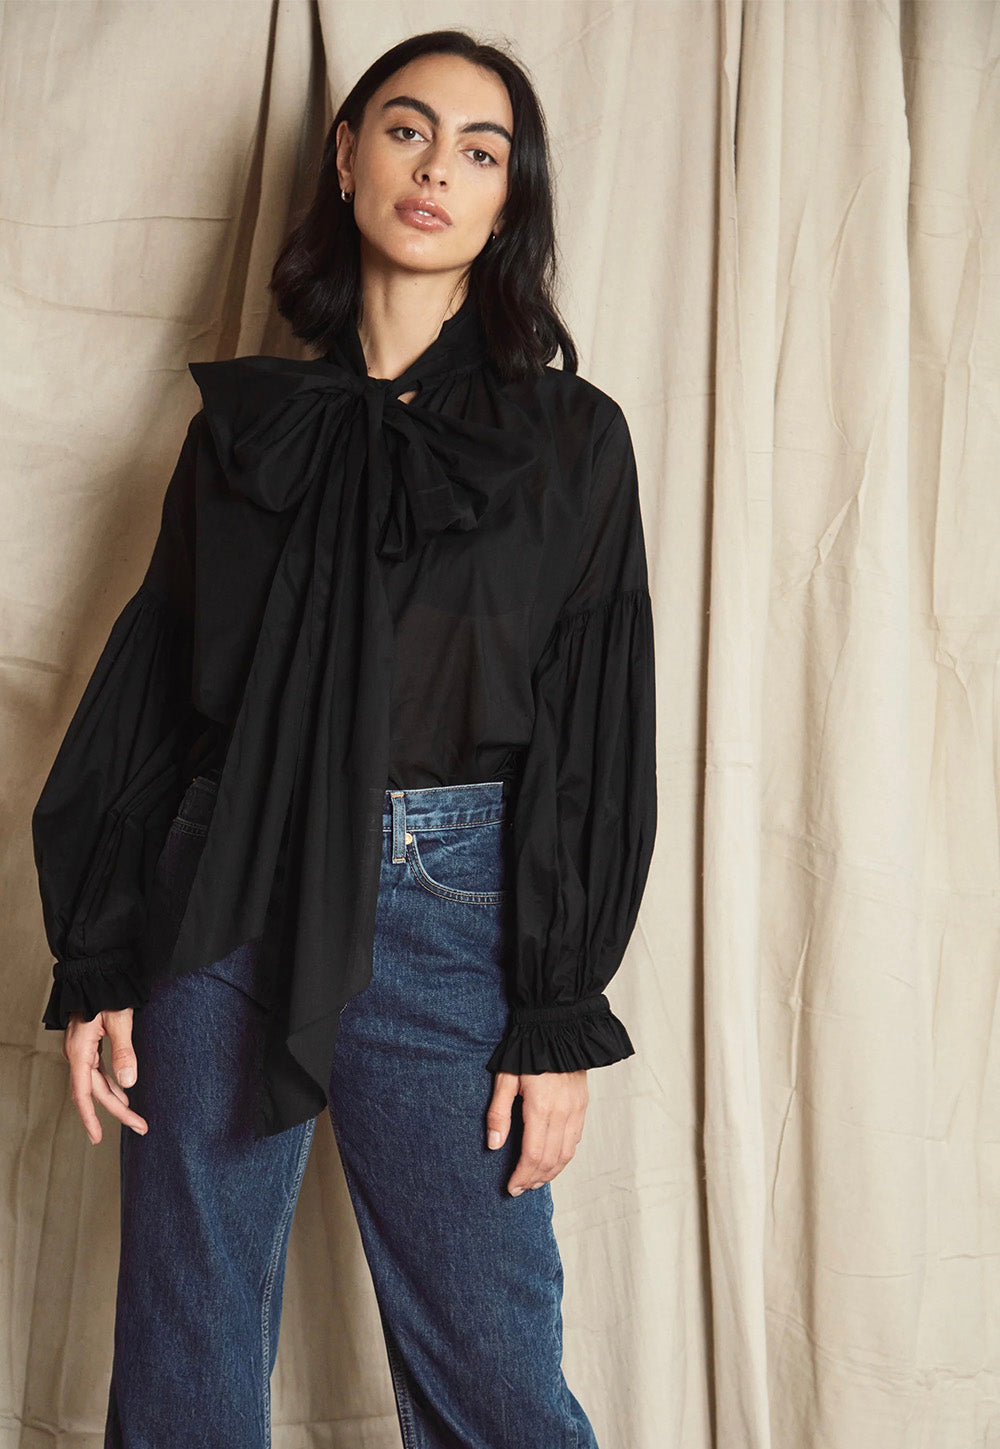 Bow Blouse - Black Cotton Voile sold by Angel Divine